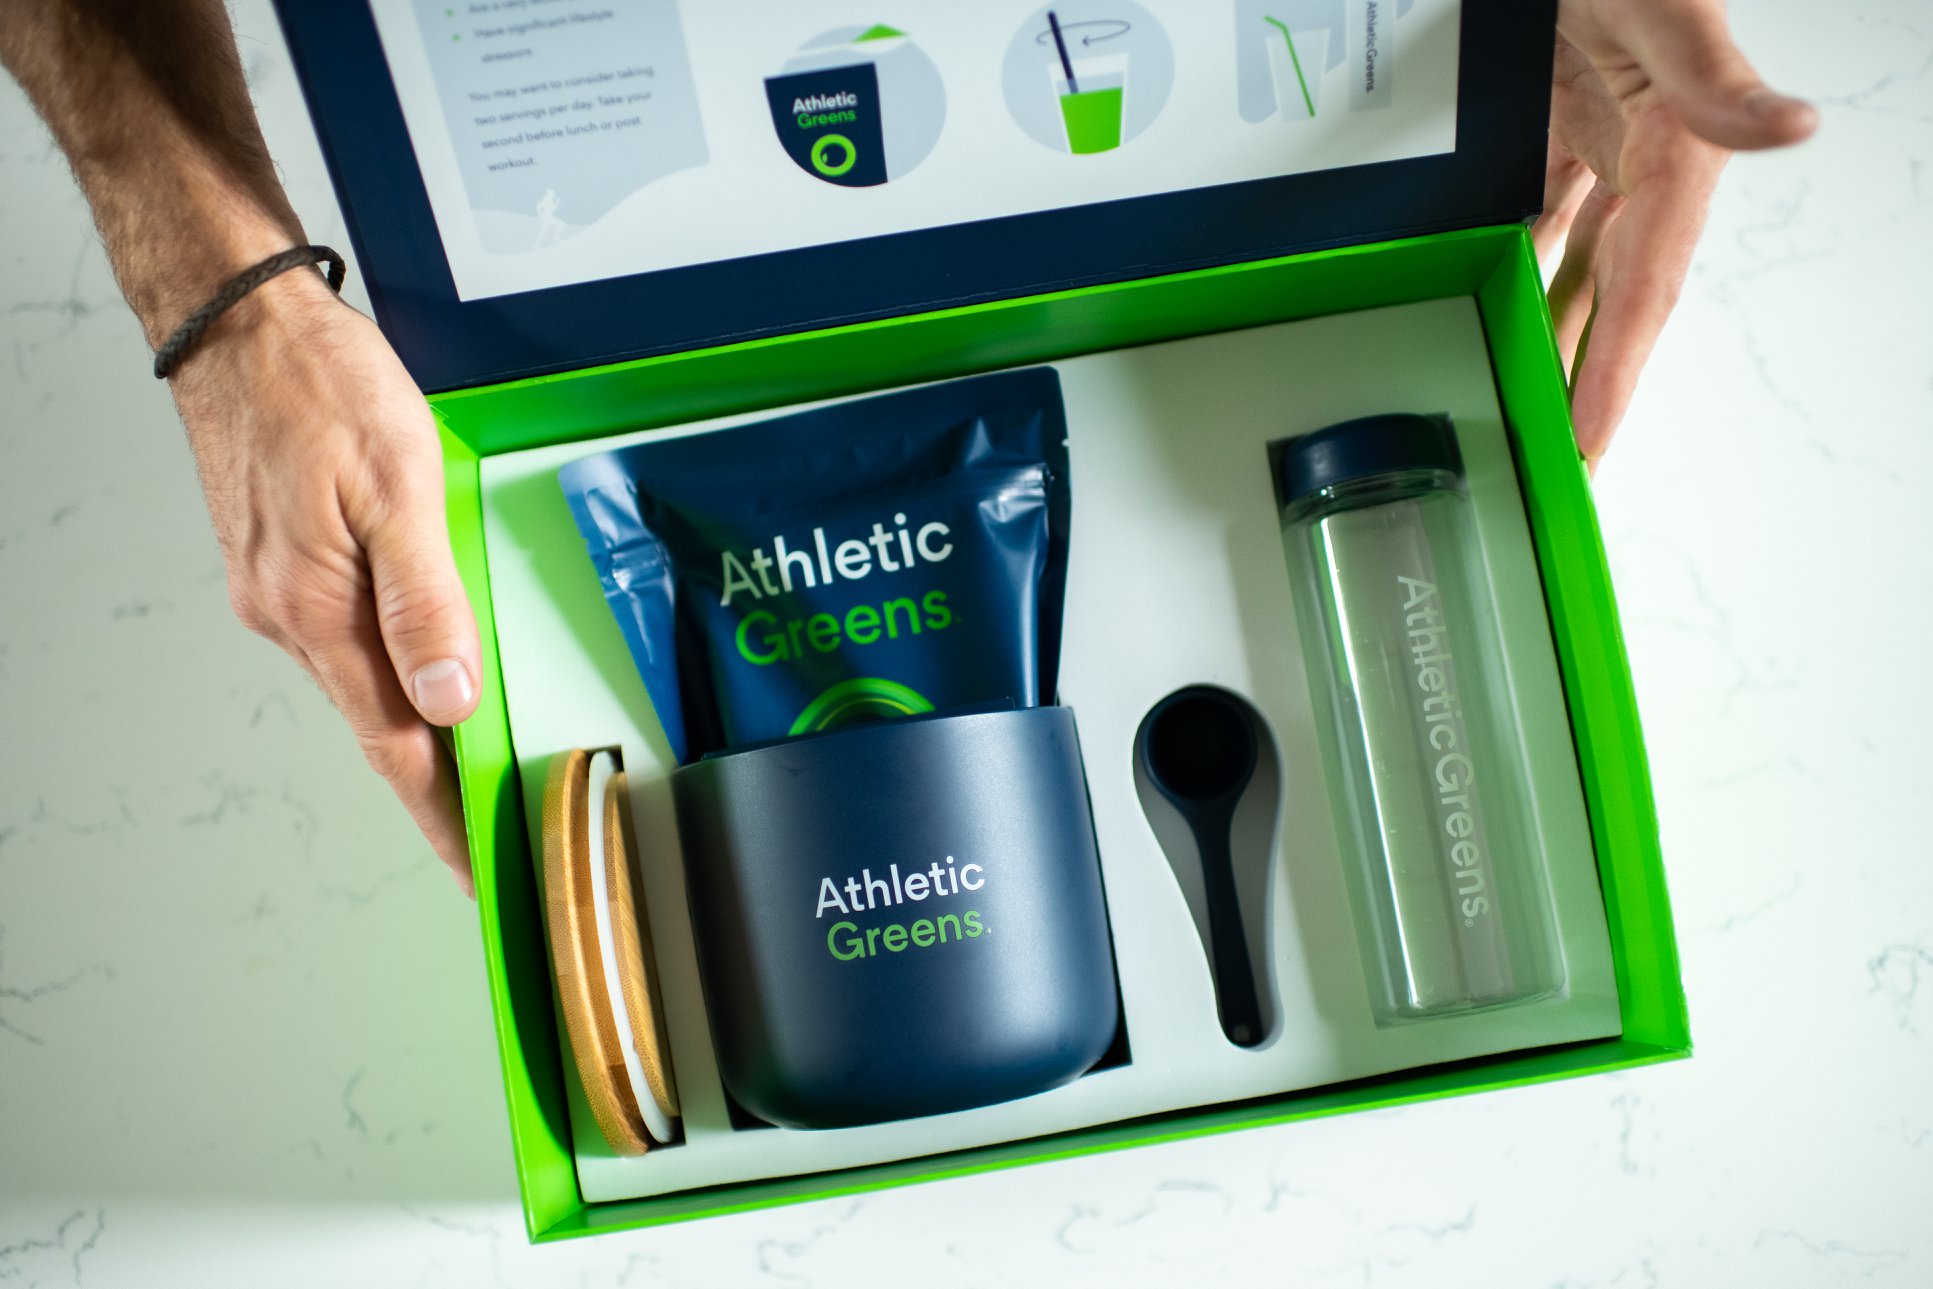 athletic greens products